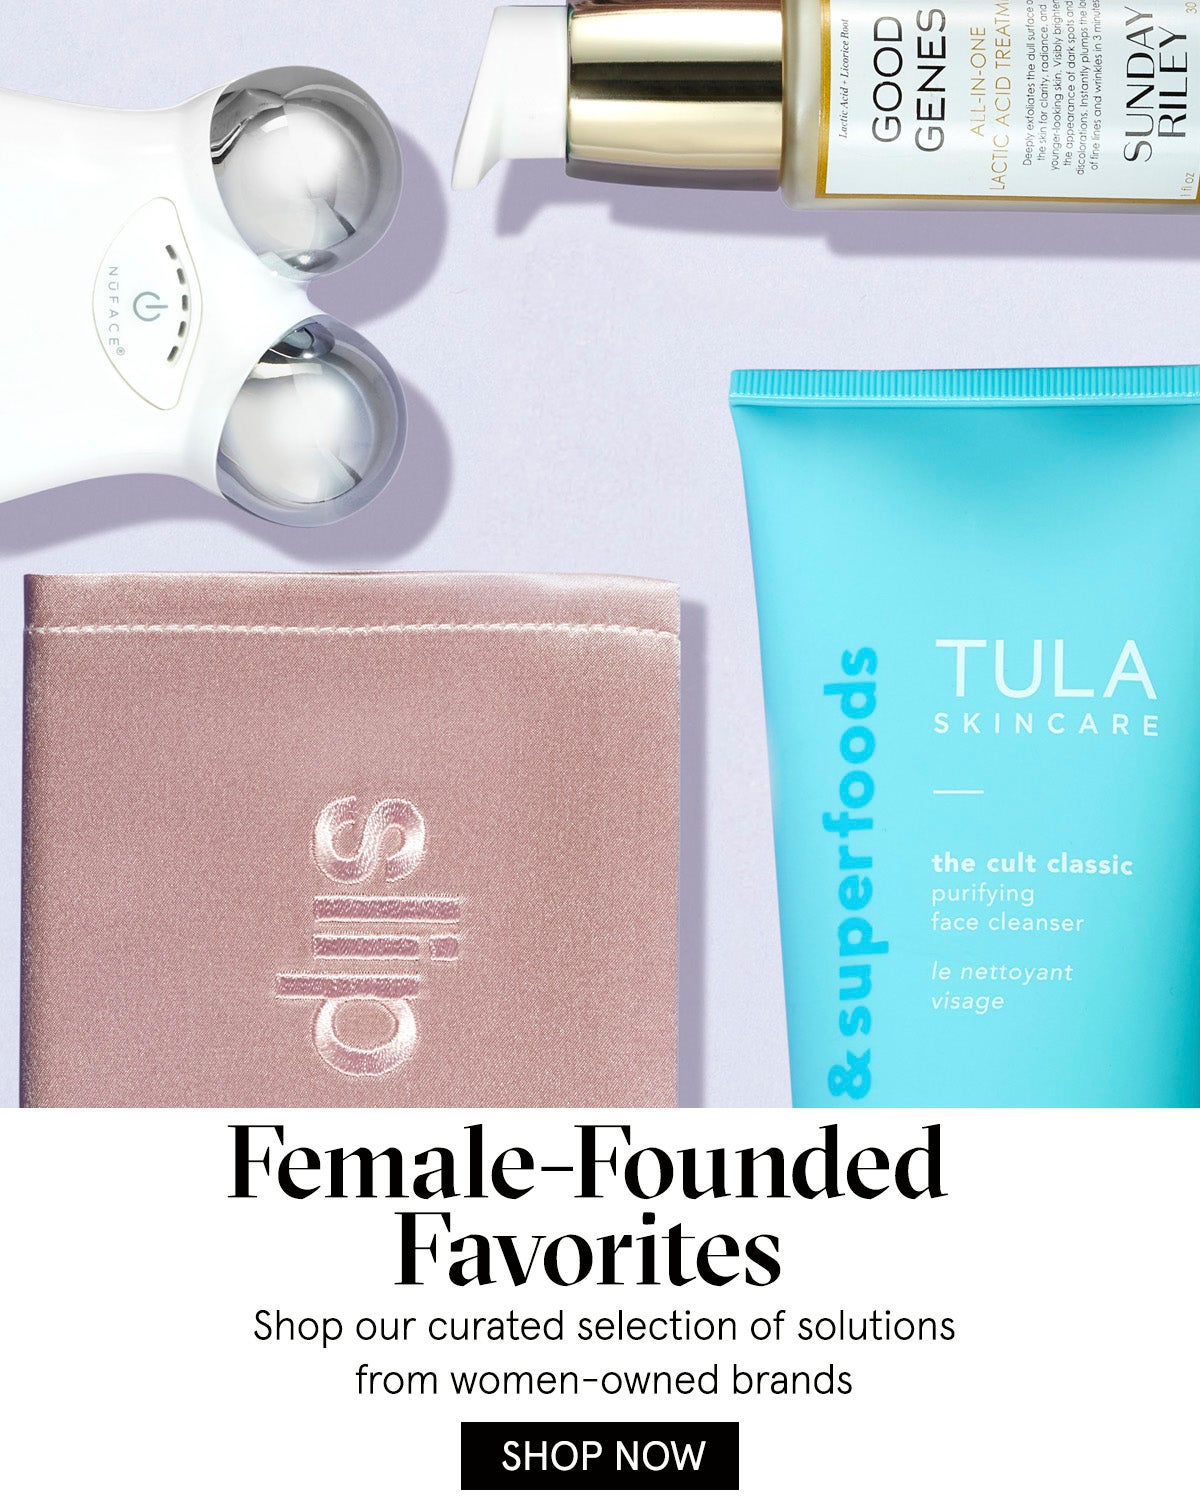 Female-Founded Favorites. Shop our curated selection of solutions from women-owned brands. SHOP NOW